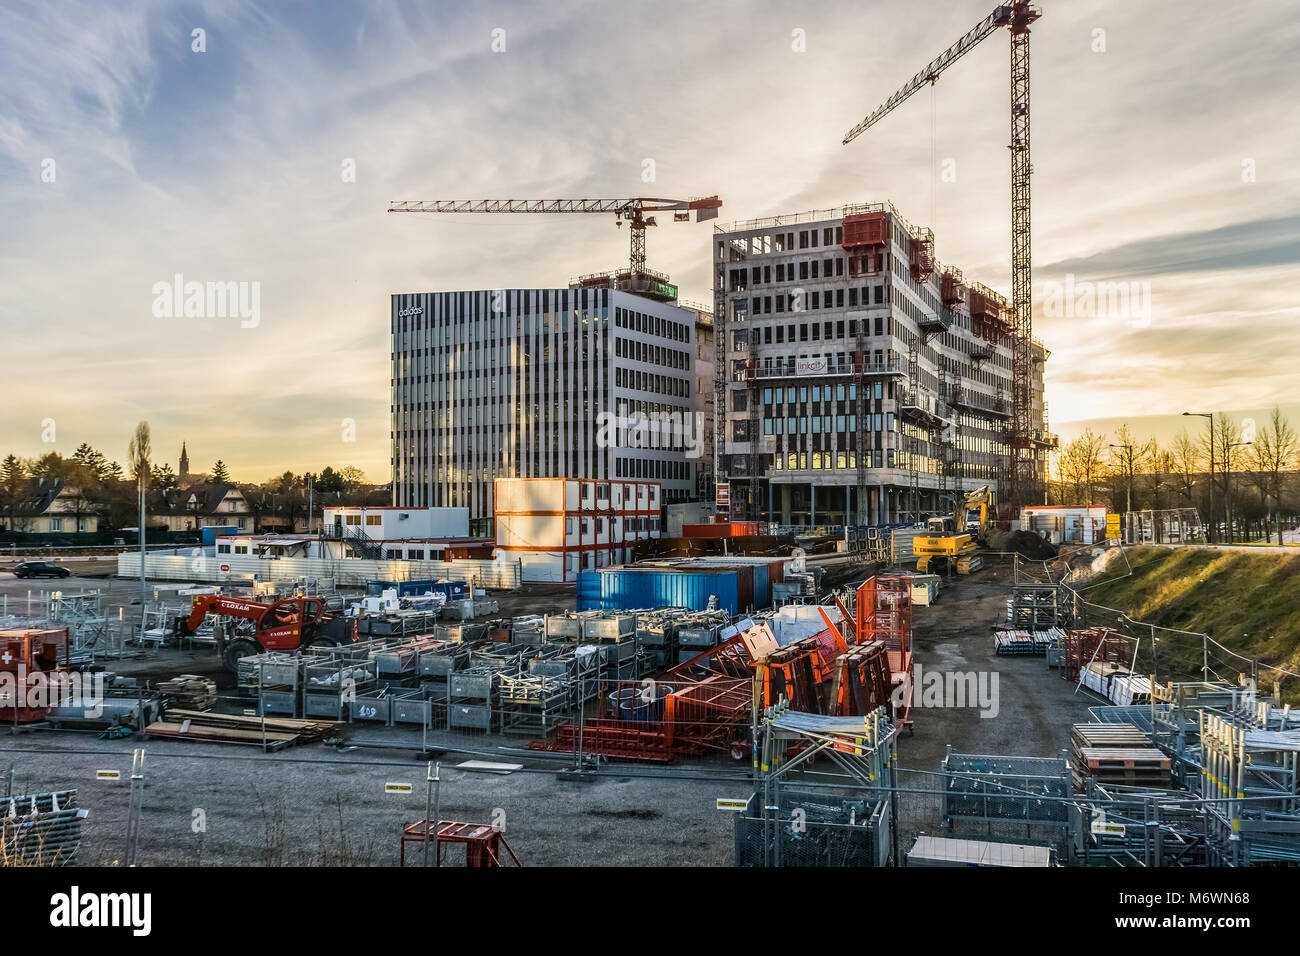 Construction site of the new international business district in the Wacken district, next to the seat of the European Parliament, Strasbourg, France Stock Photo